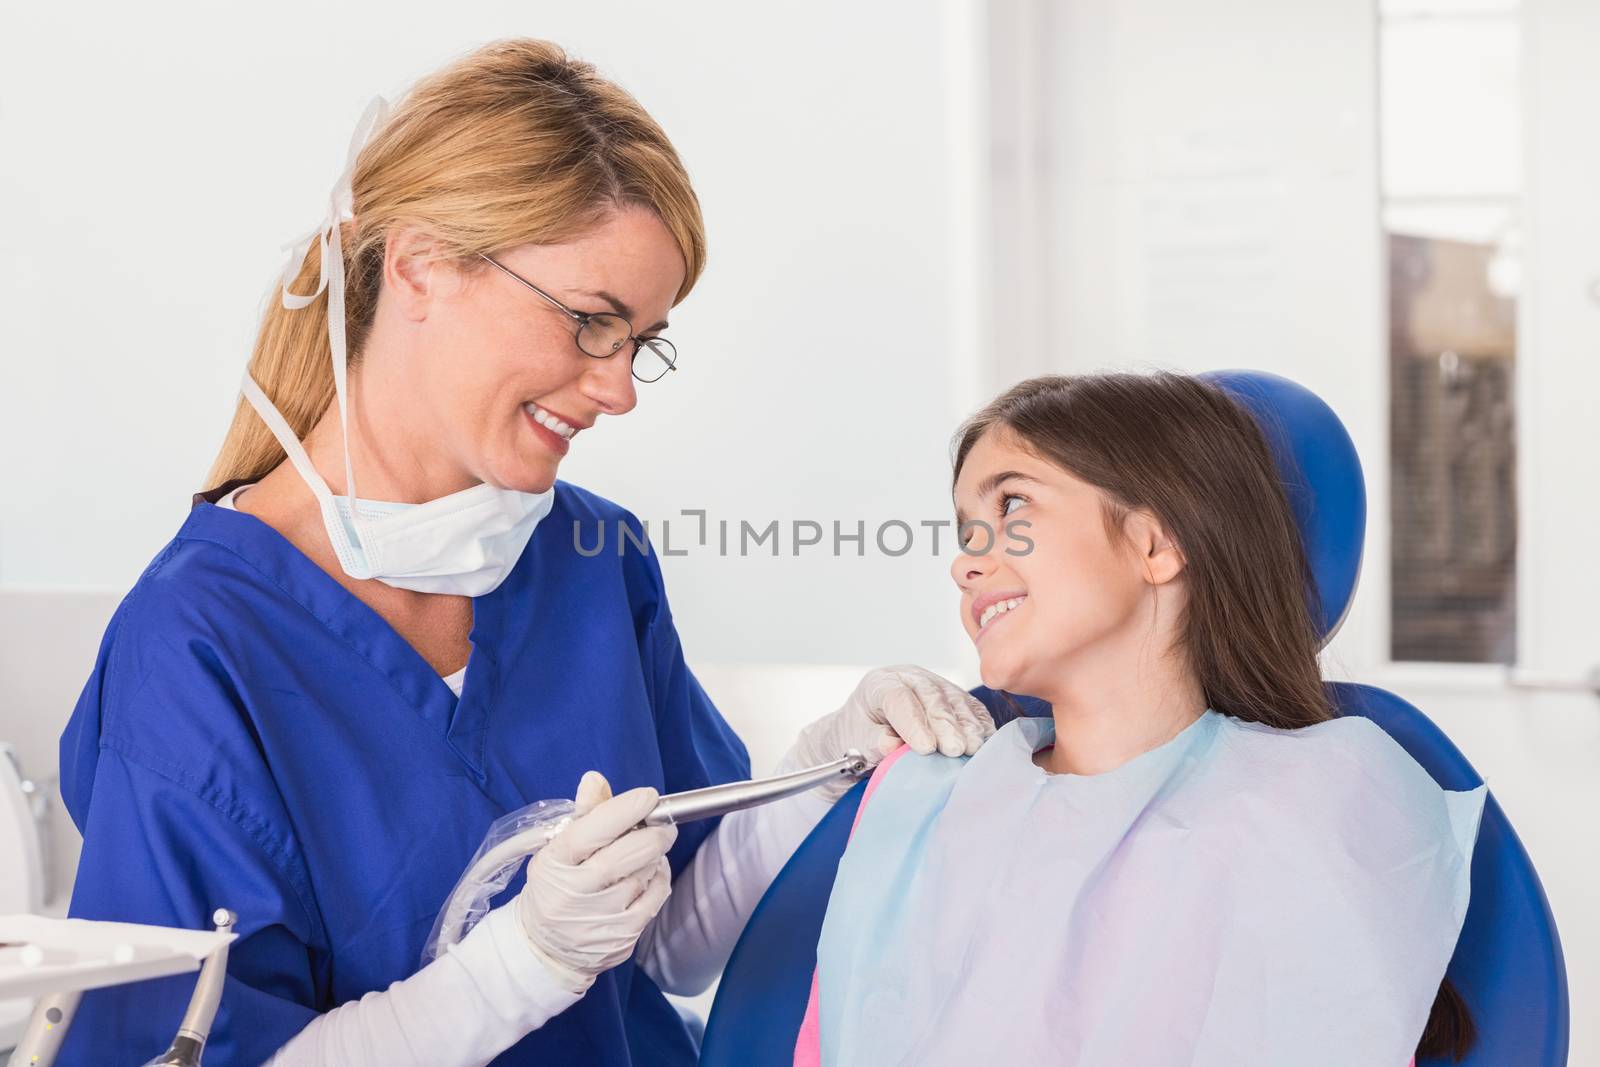 Smiling pediatric dentist reassuring her young patient in dental clinic